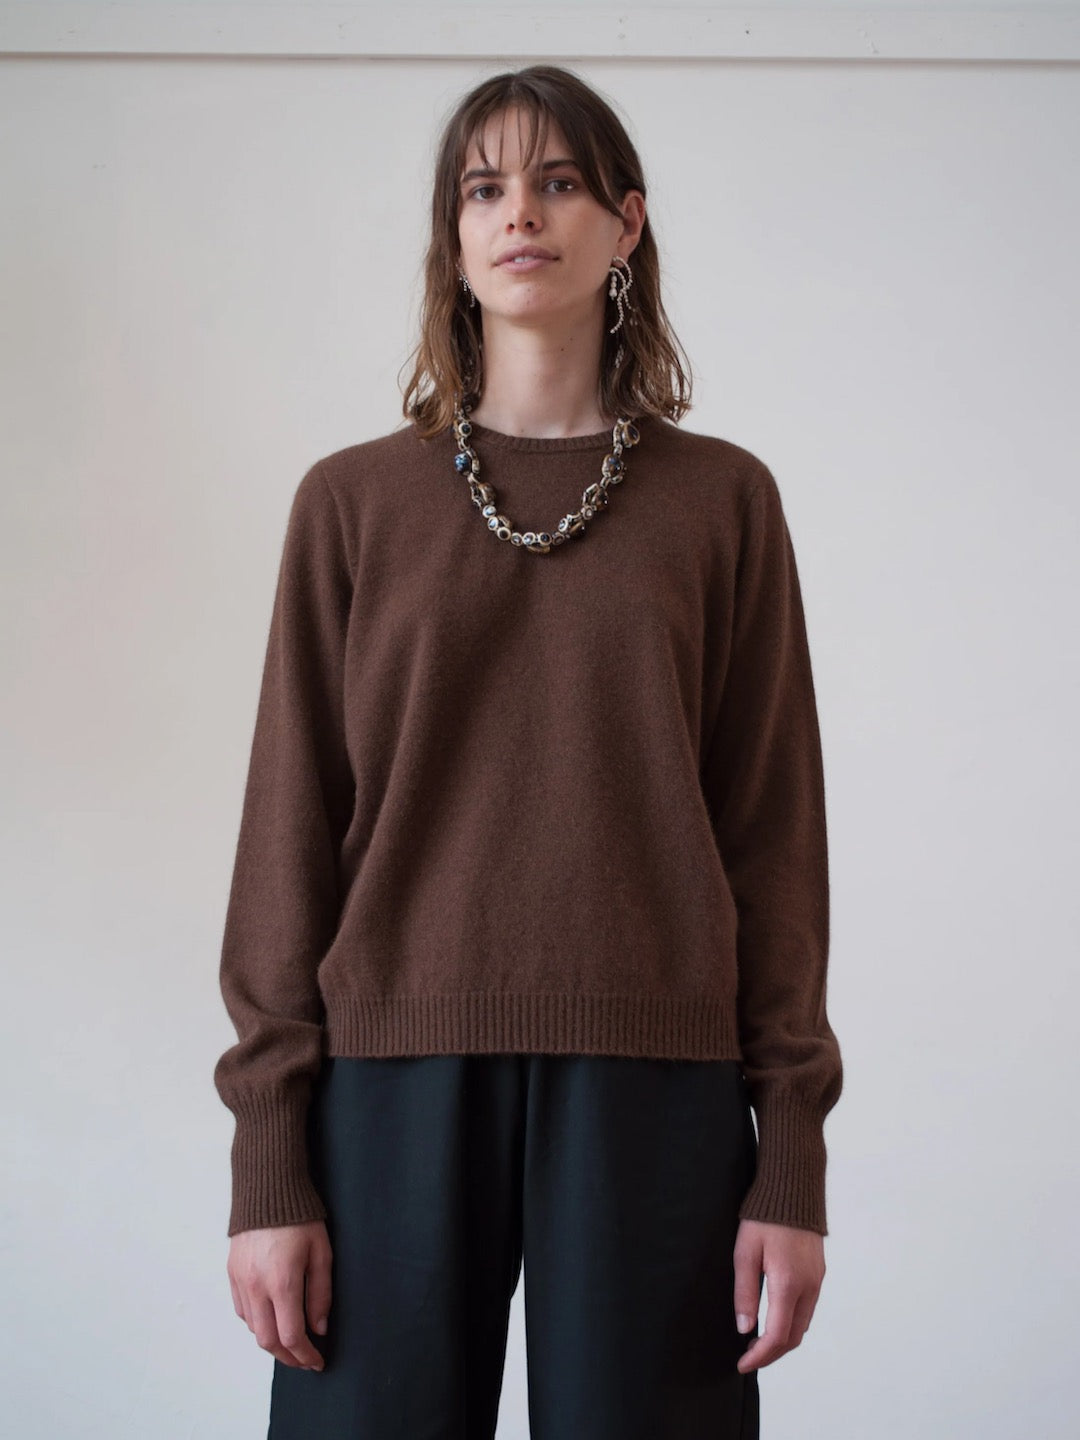 The model is wearing a OVNA OVICH Kom Jumper – Mud and black pants.